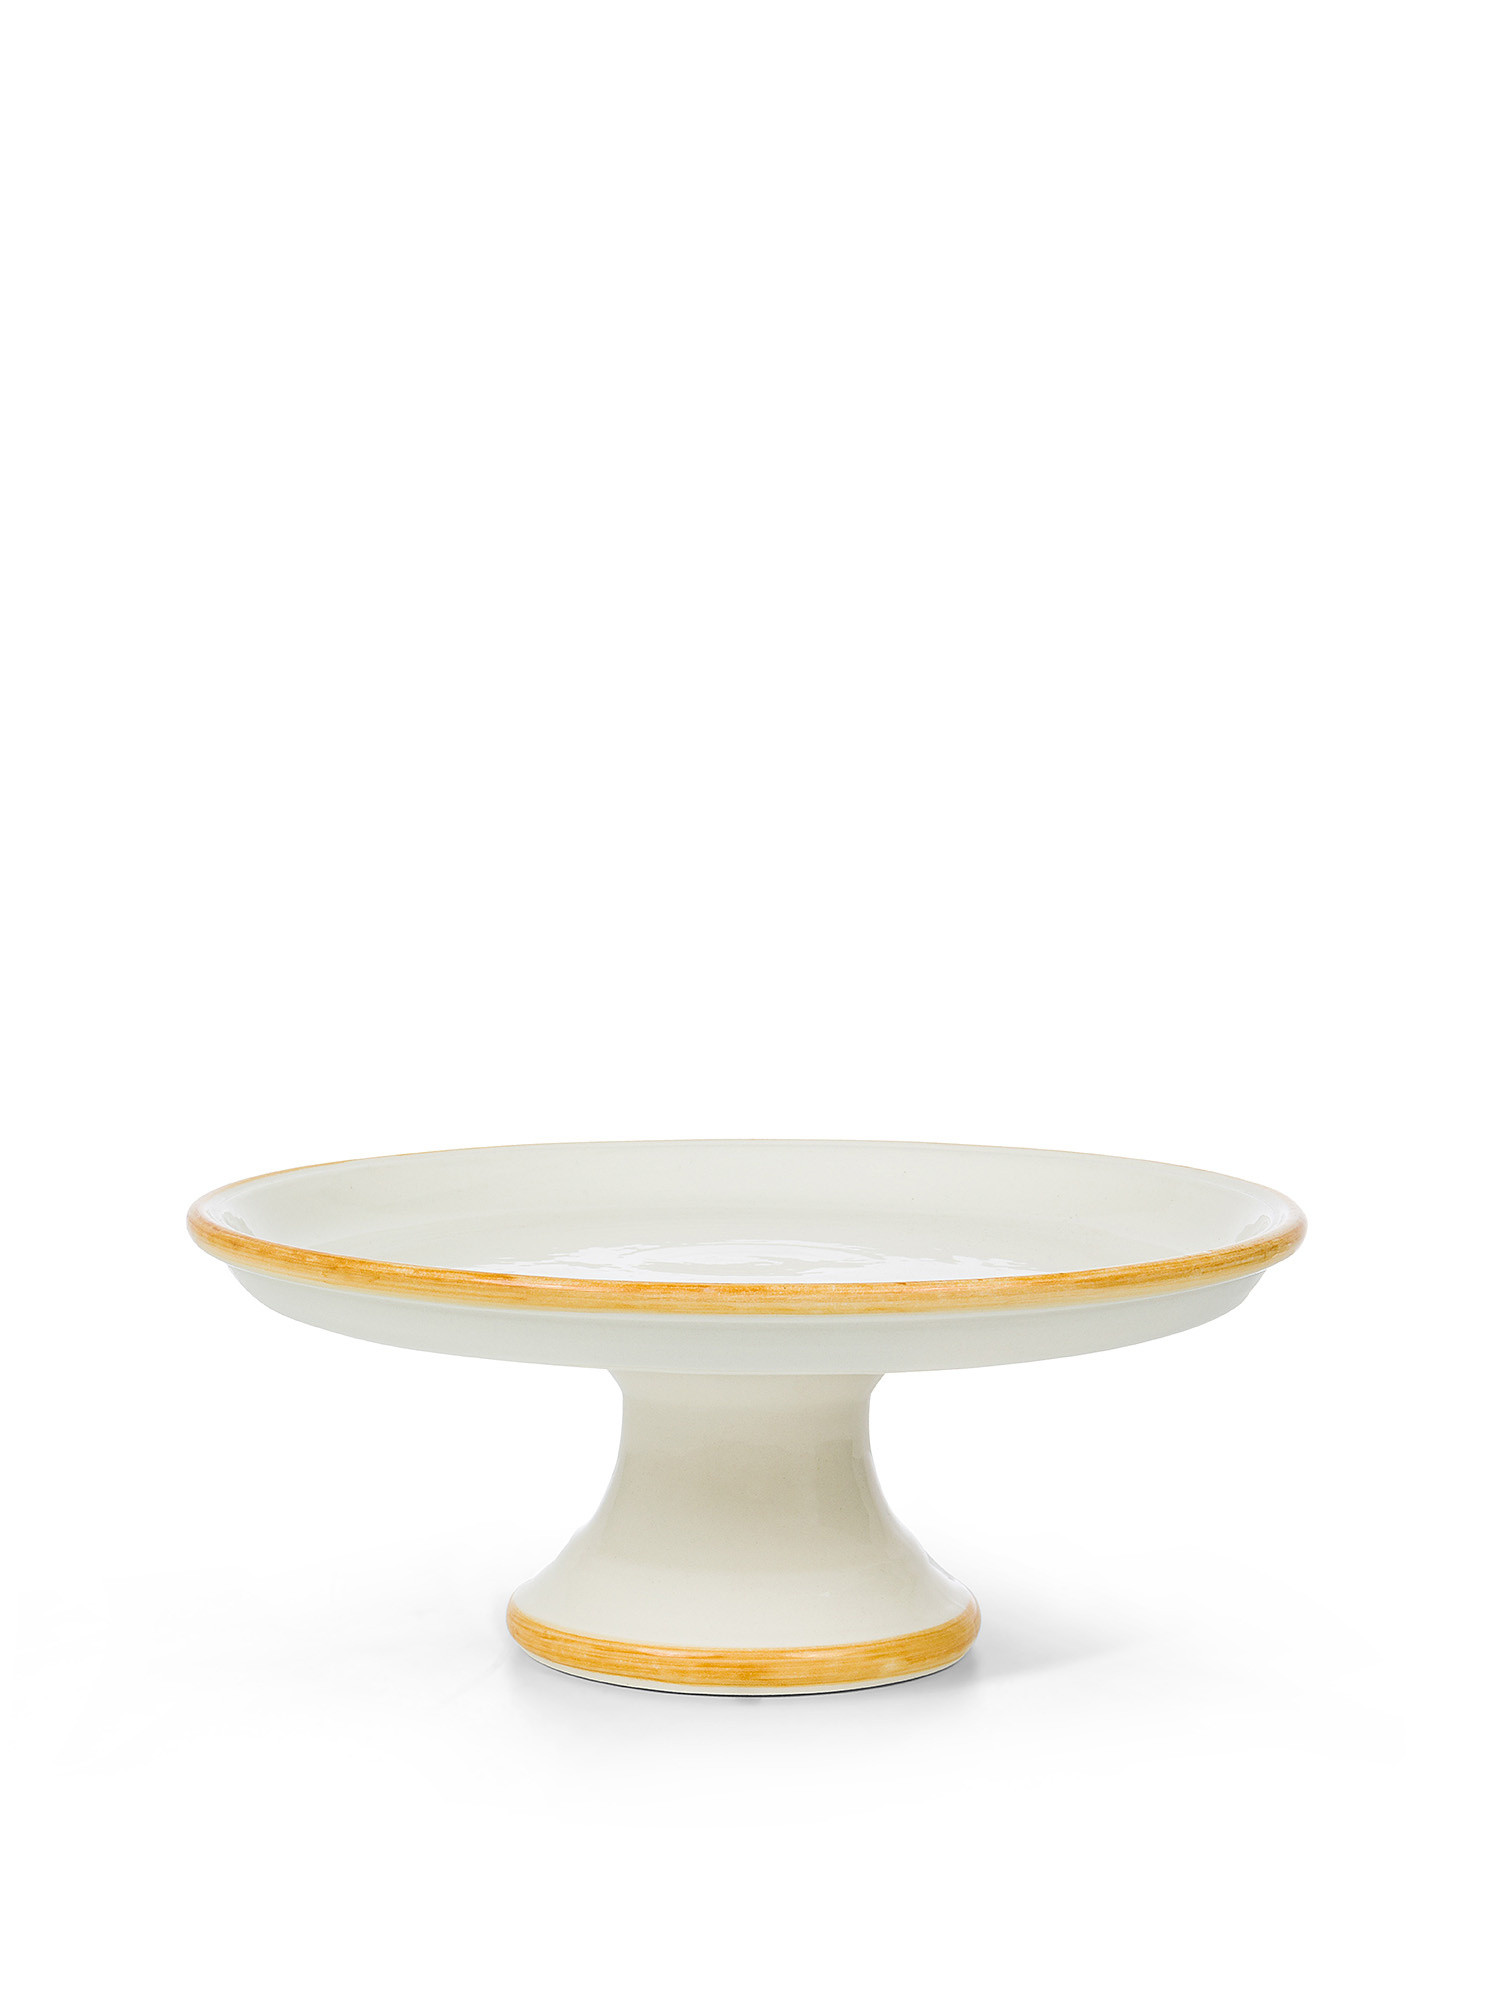 Ceramic cake stand with colored edge, White, large image number 0